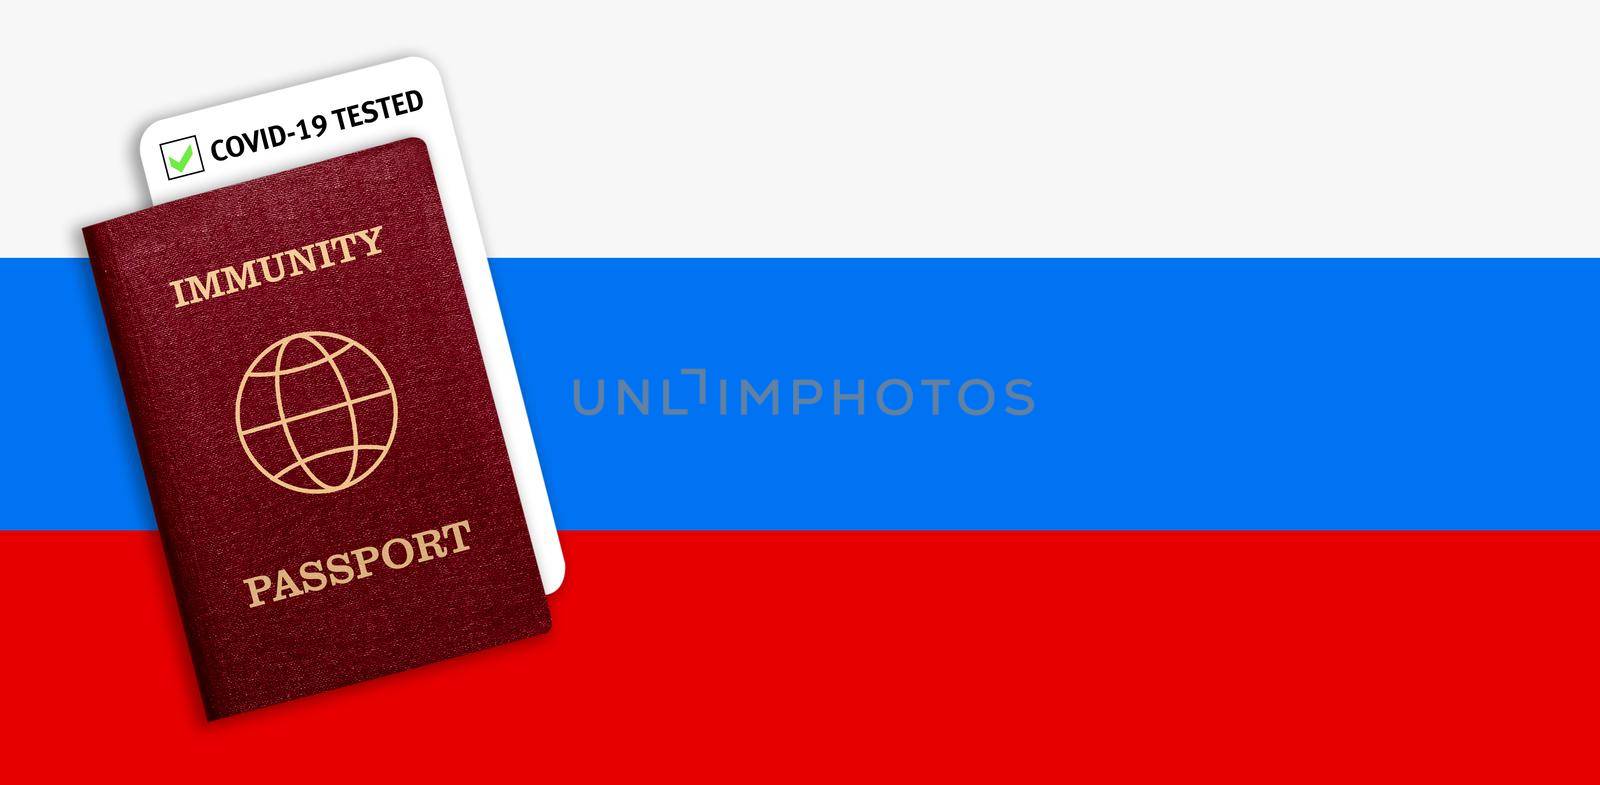 Immunity passport and test result for COVID-19 on flag of Slovenia Certificate for people who have had coronavirus or made vaccine. Vaccination passport against covid-19 that allows you travel